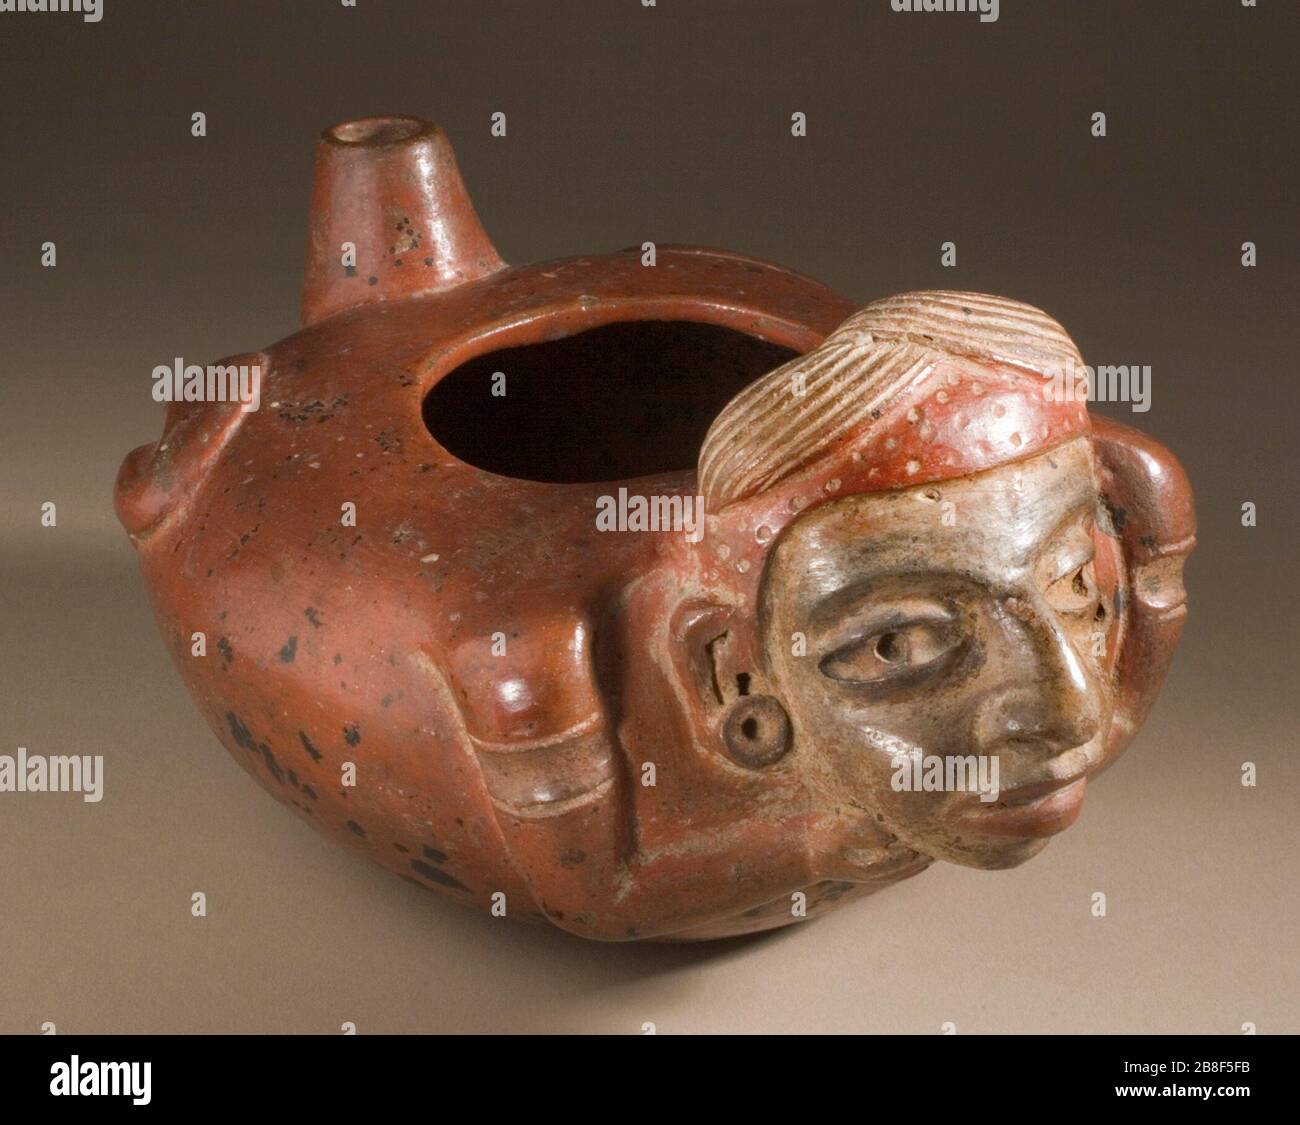 'Figural Vessel with Spout (image 1 of 2); English:  Guatemala, Southern Highlands, Maya, 100-300 Furnishings; Serviceware Burnished and slipped ceramic 4 1/8 x 6 3/4 x 5 1/2 in. (10.48 x 17.15 x 13.97 cm) Purchased with funds provided by the Joan Palevsky Bequest (M.2006.101) Art of the Ancient Americas Currently on public view: Art of the Americas Building, floor 4; 100-300; ' Stock Photo